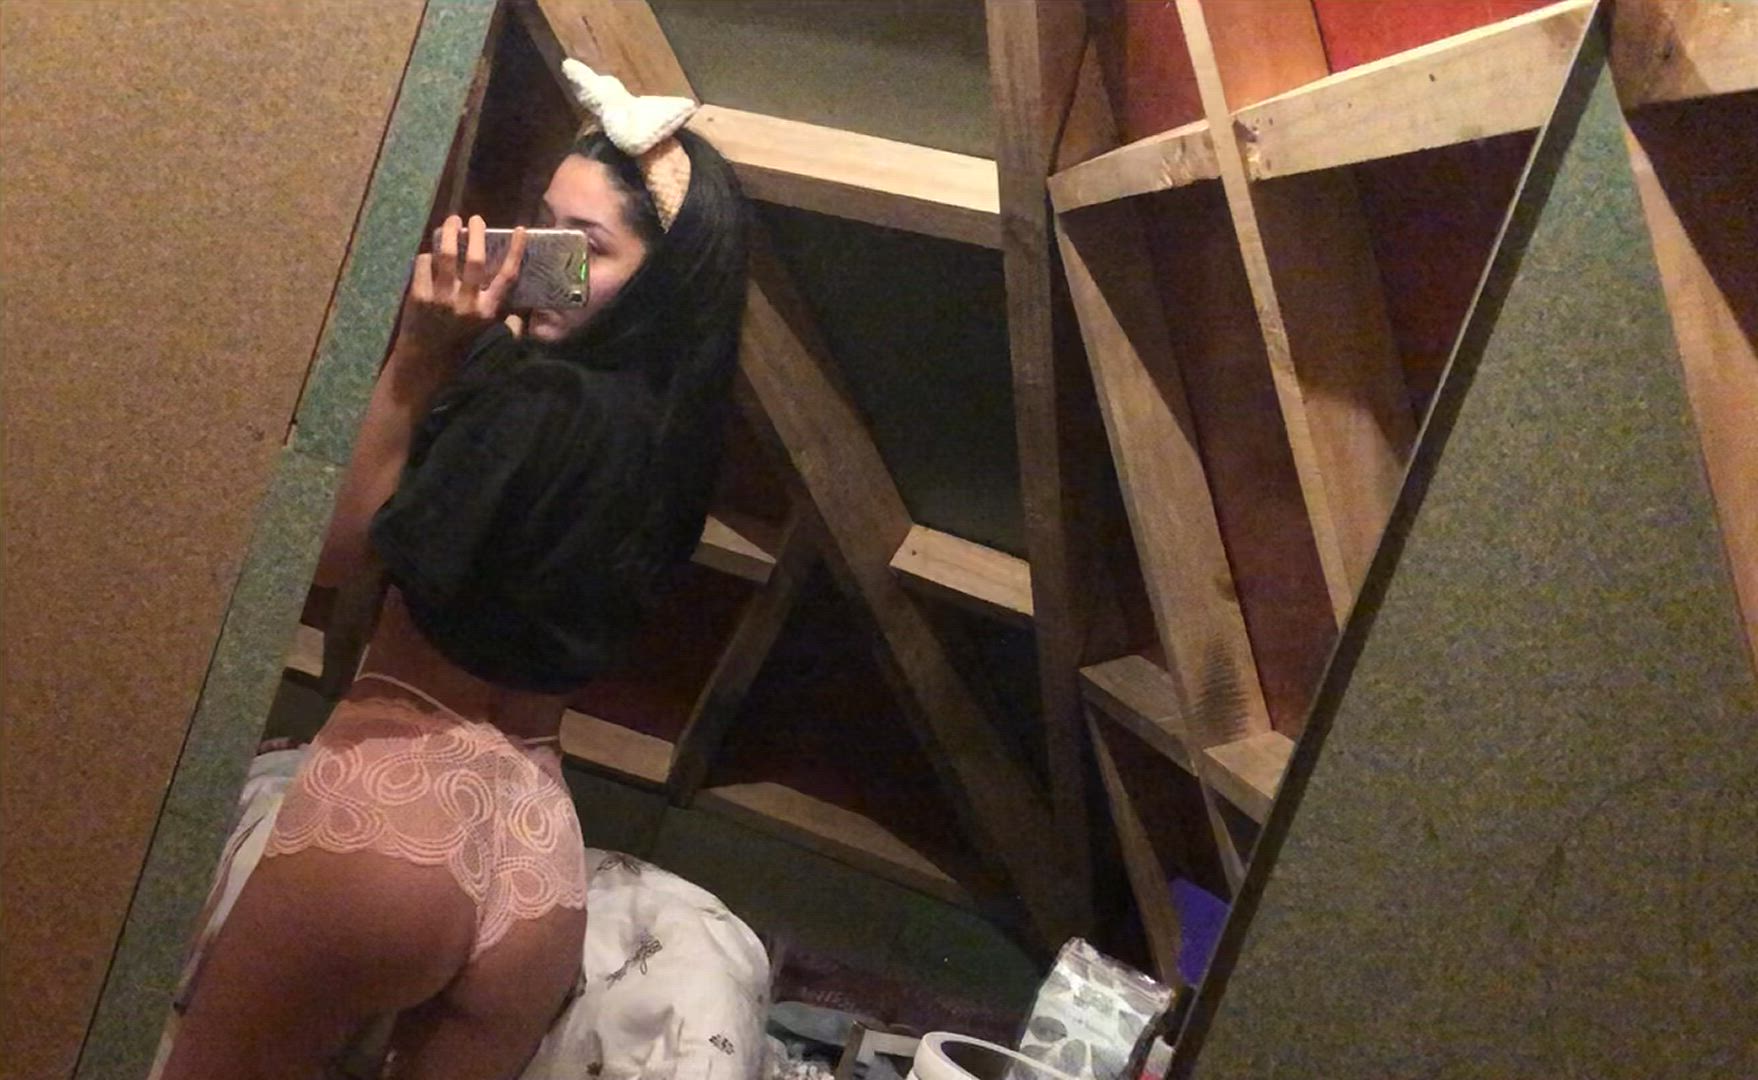 Amateur porn video with onlyfans model isabellafloreees <strong>@isabella_flores98</strong>